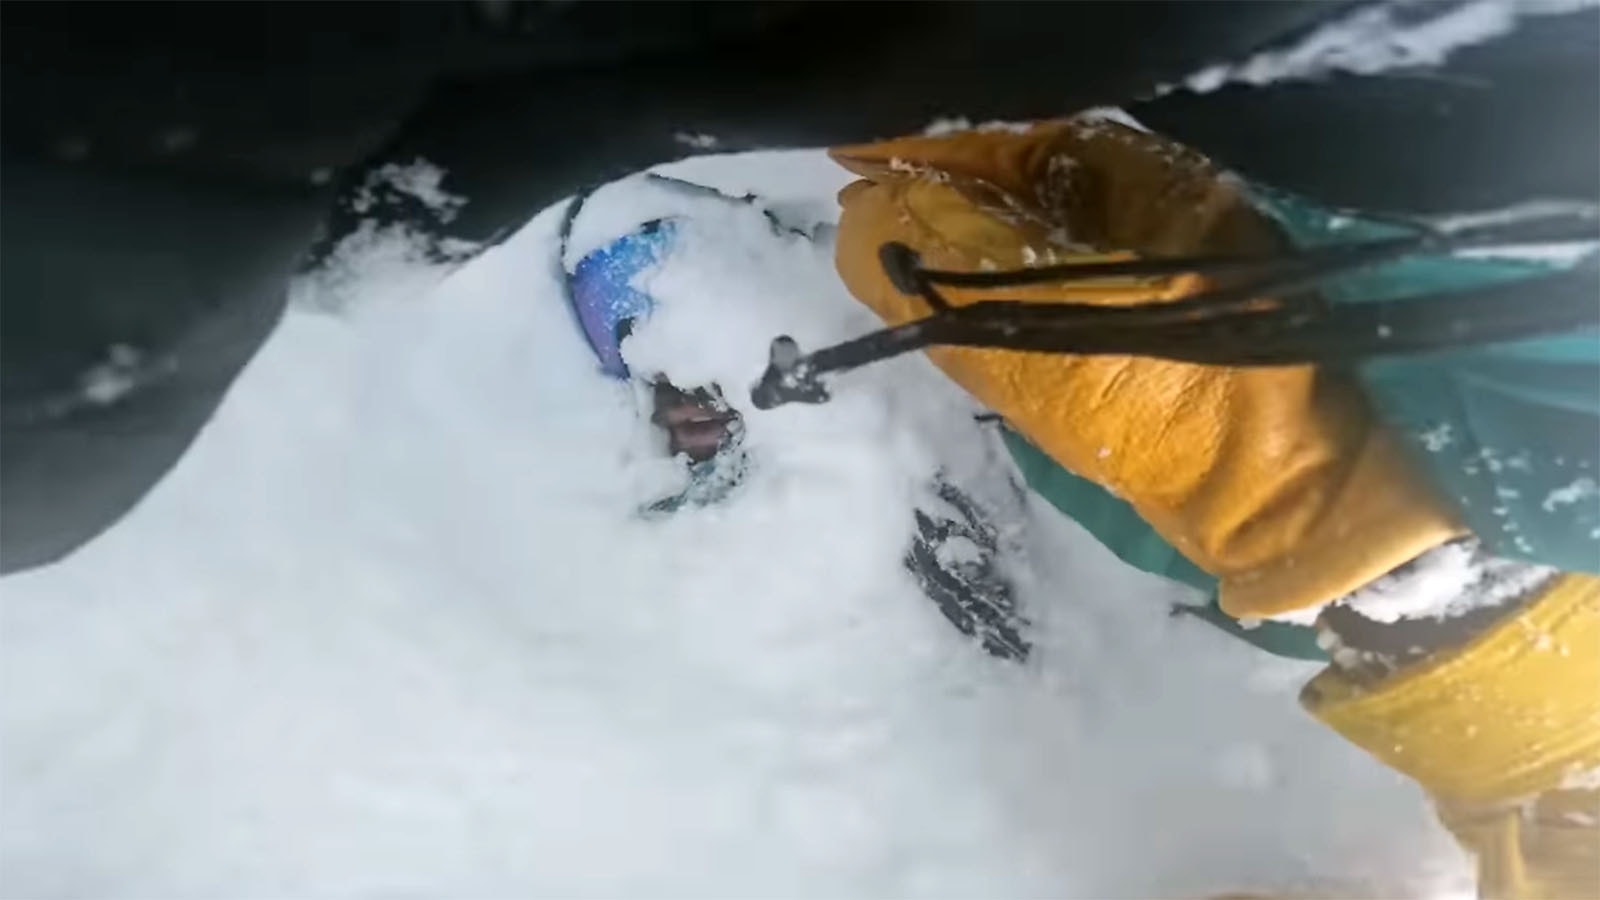 An image from Francis Zuber's GoPro camera shows the moment he uncovered the mouth and face of a snowboarder who'd tumbled head-first into a deep tree well. The snowboarder, Ian Seeger, was fine thanks to Zuber digging him out.